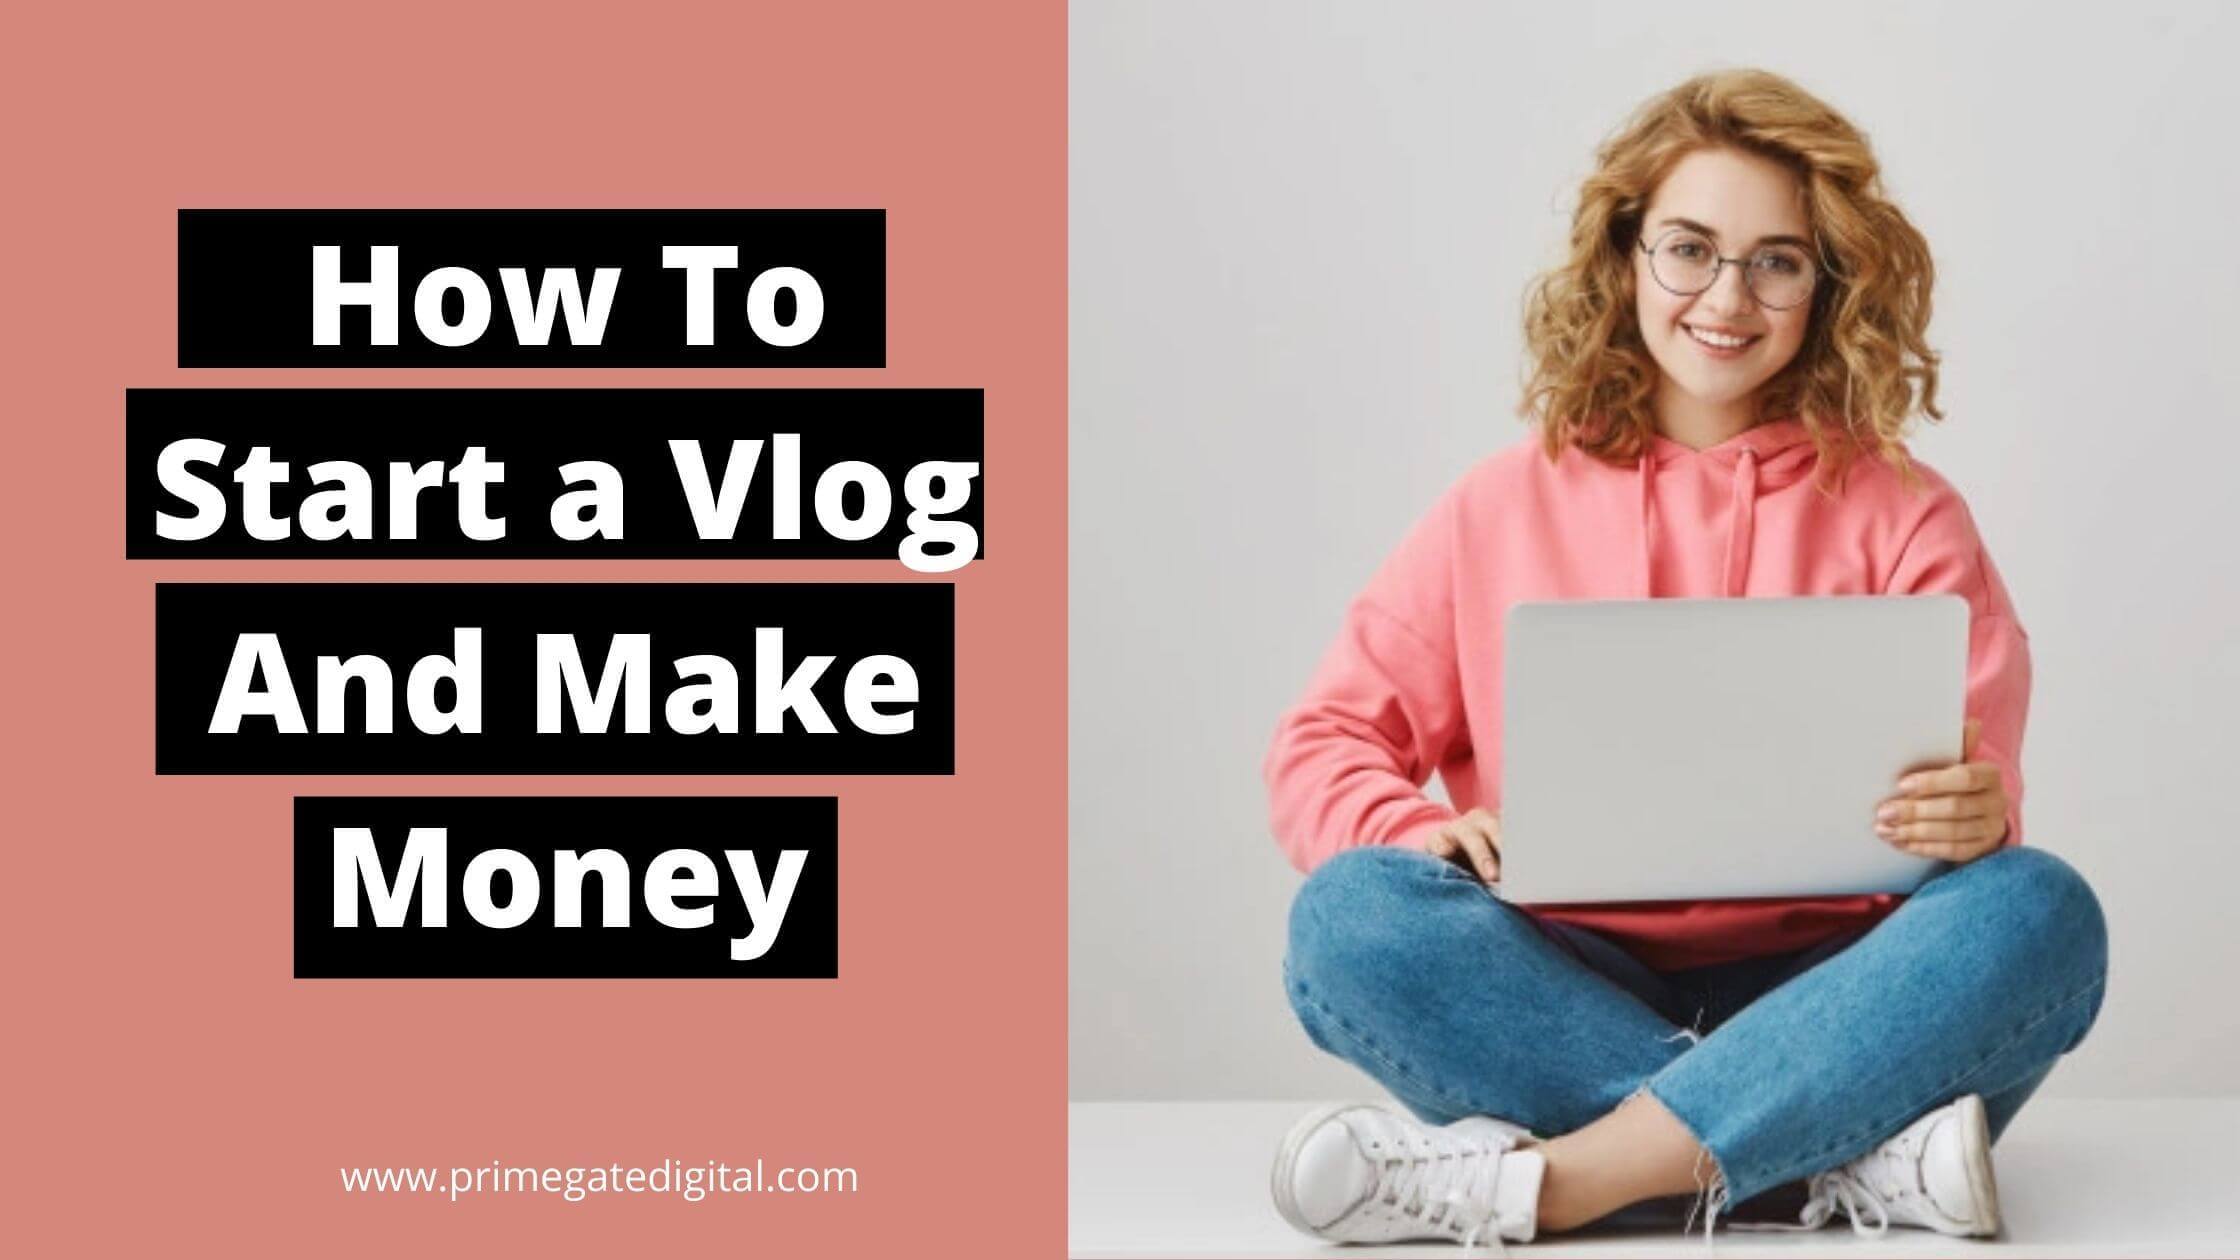 How To Start a Vlog And Make Money